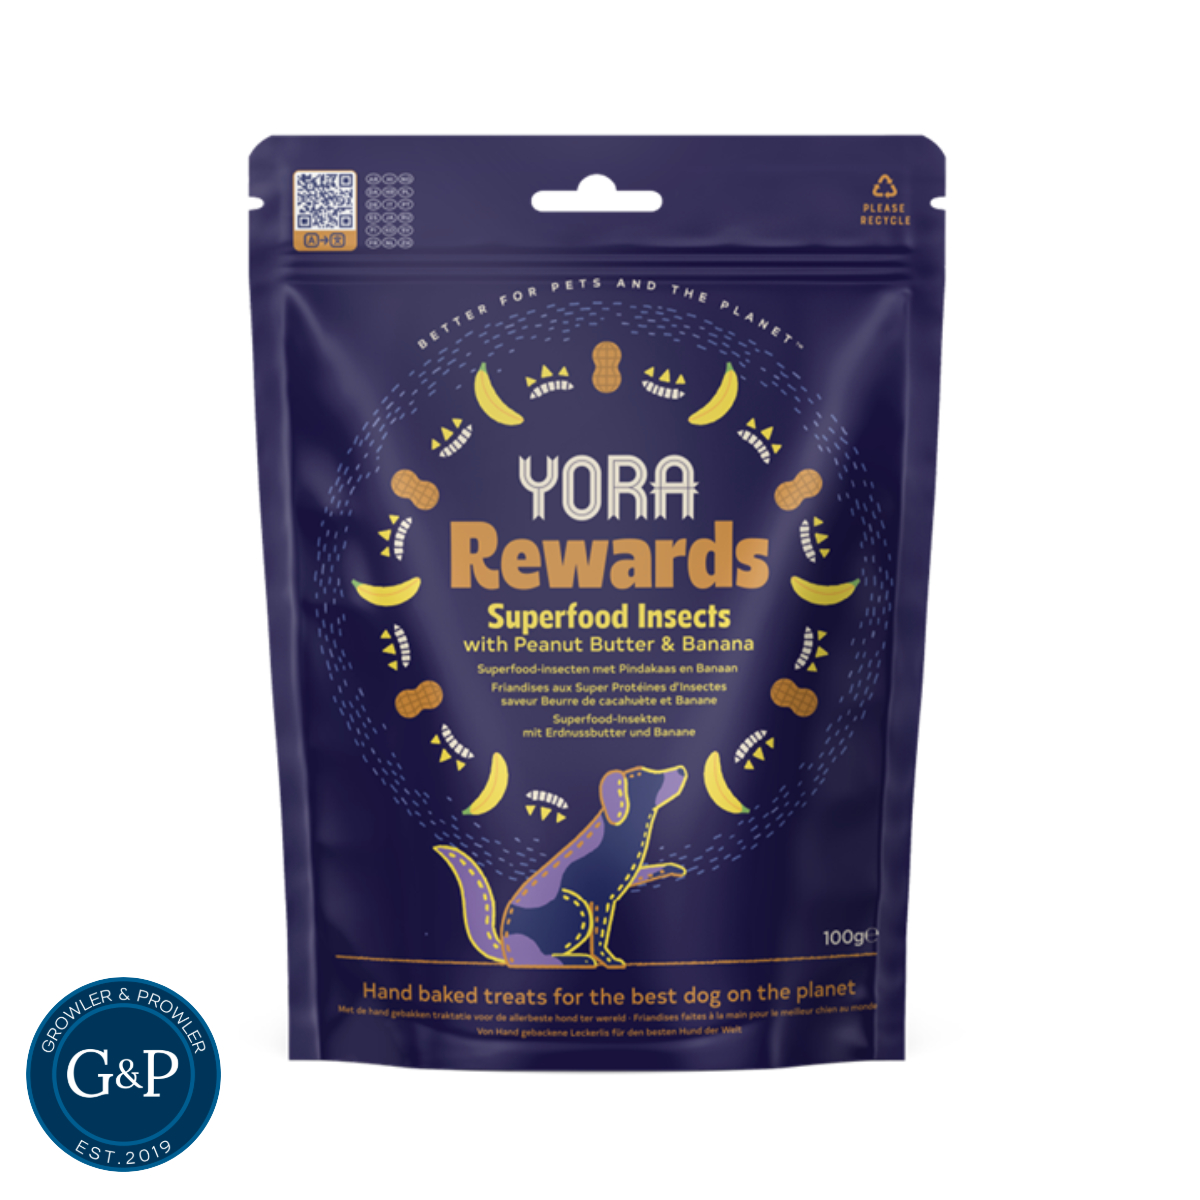 Yora Superfood Insect with Peanut Butter & Banana Dog Treats